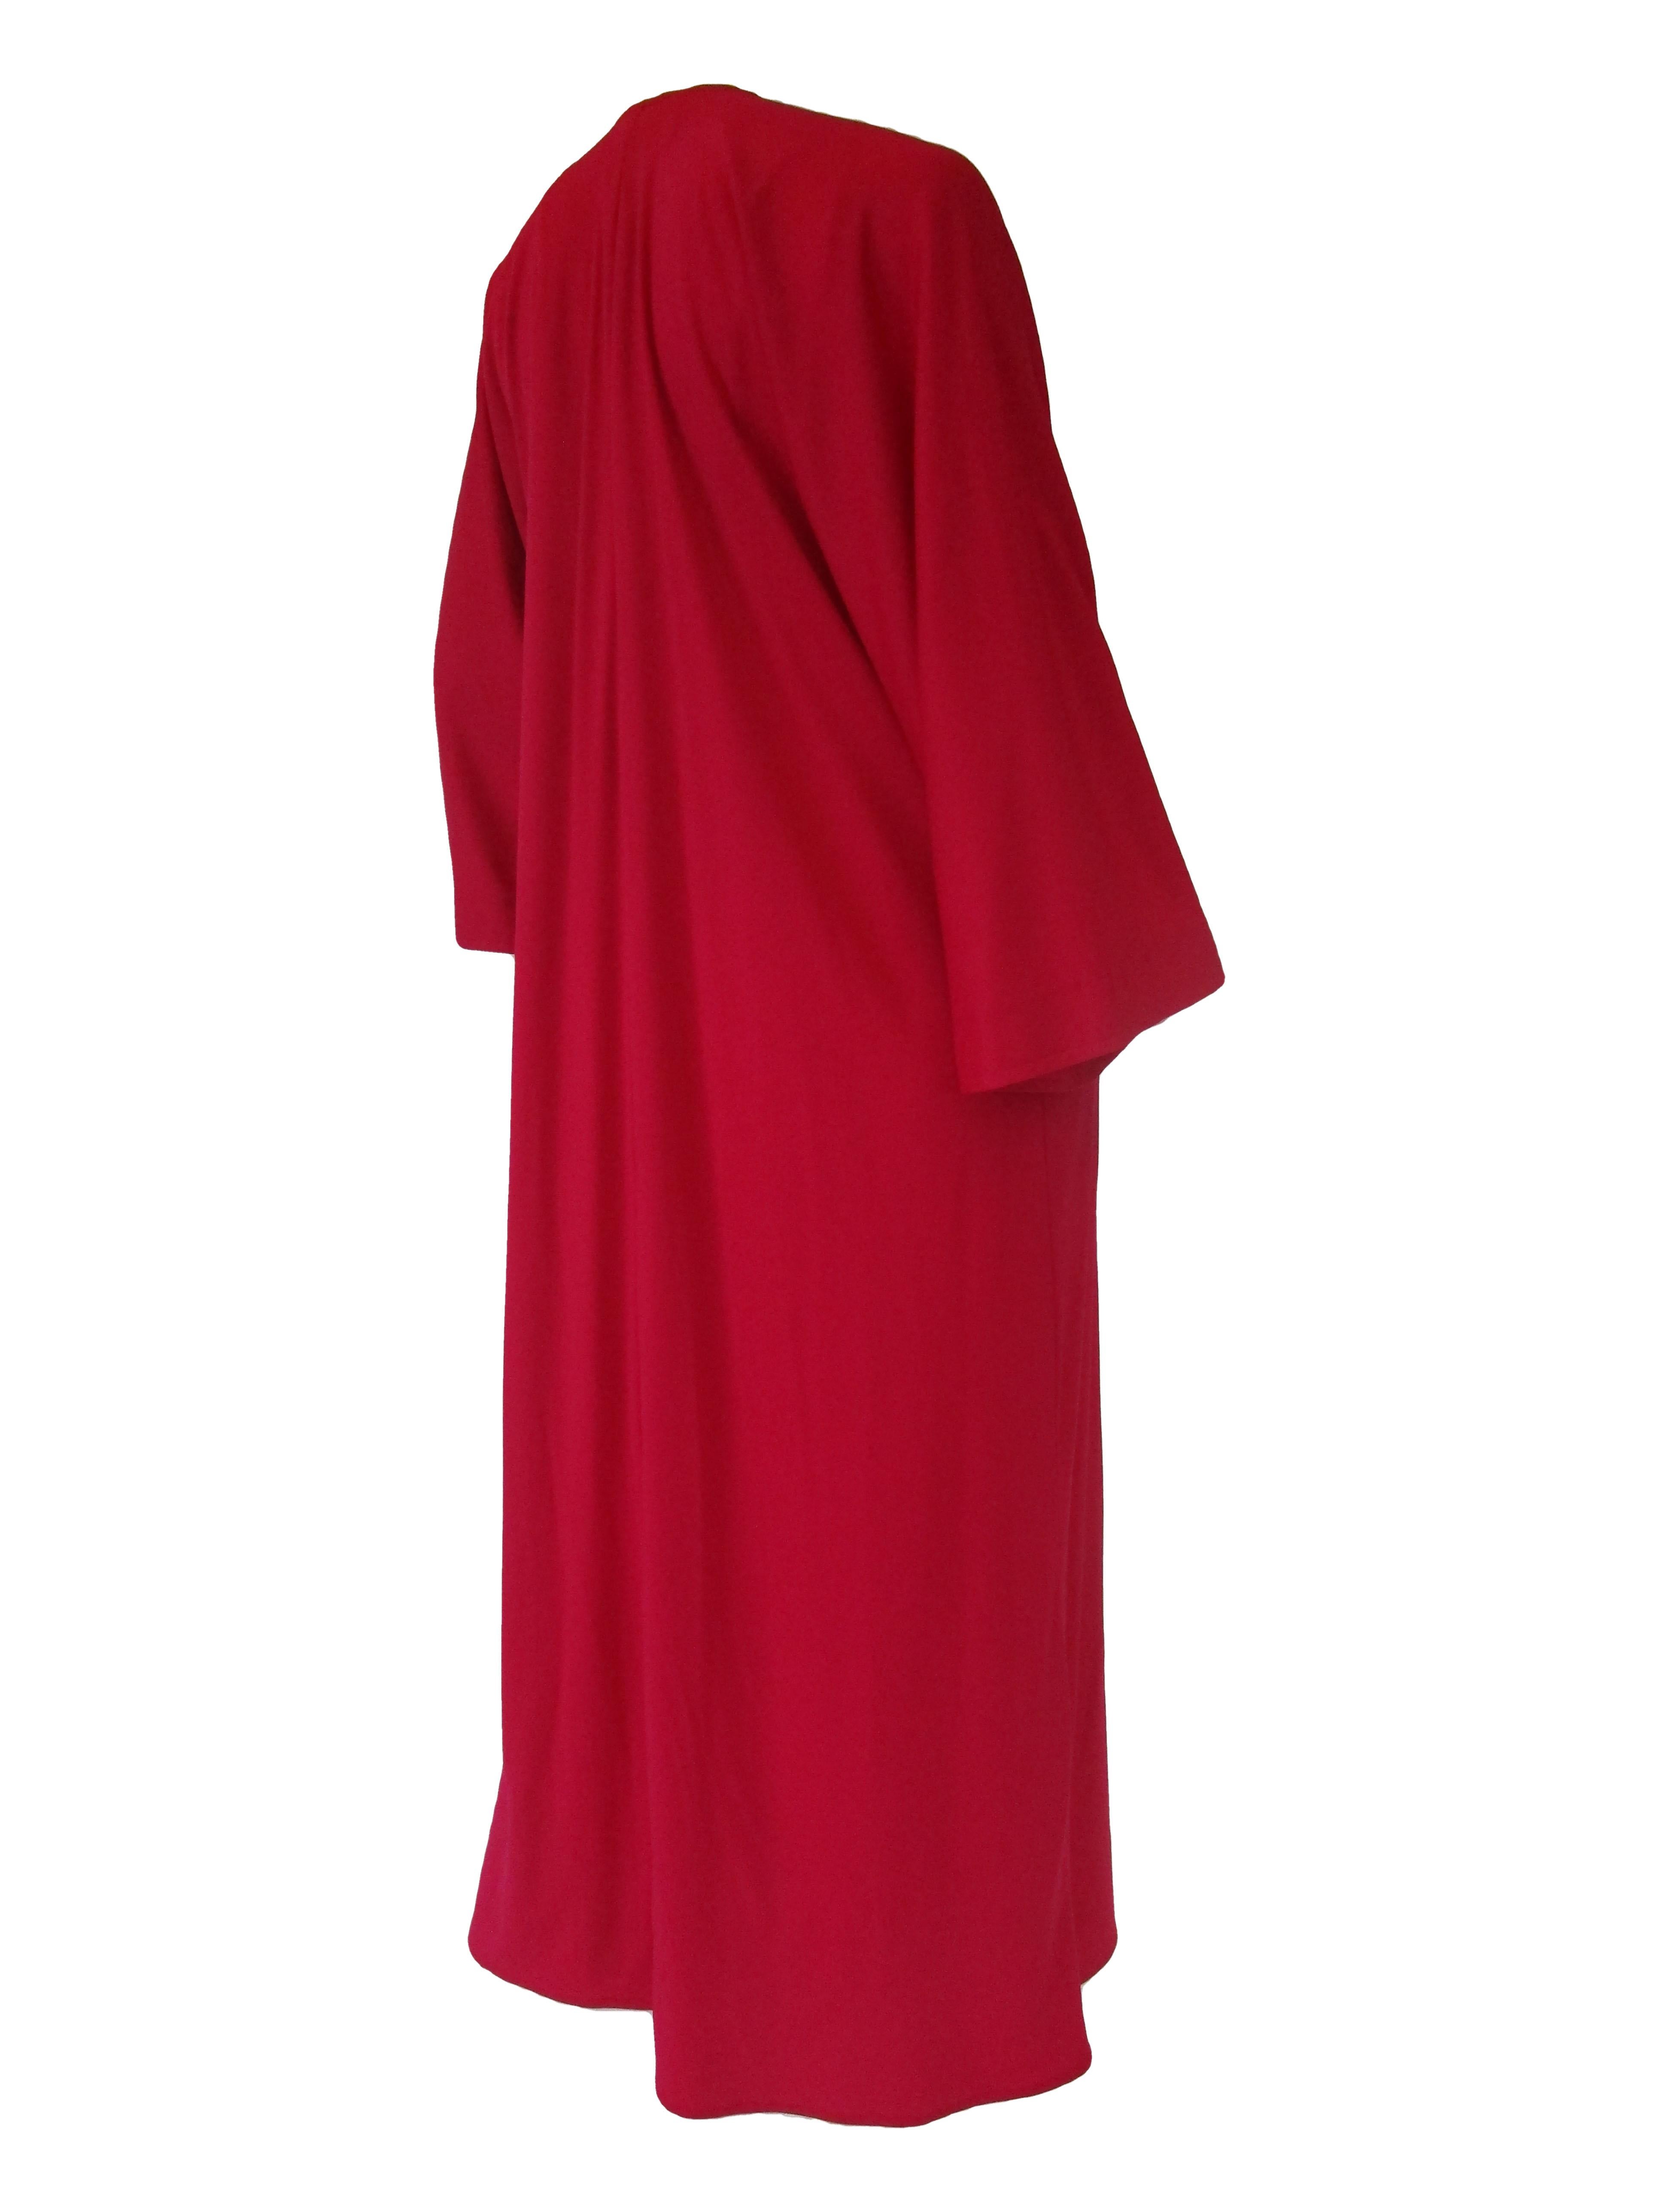 Classic 1980’s Halston Red Jersey Caftan / Maxi Dress  For Sale 2